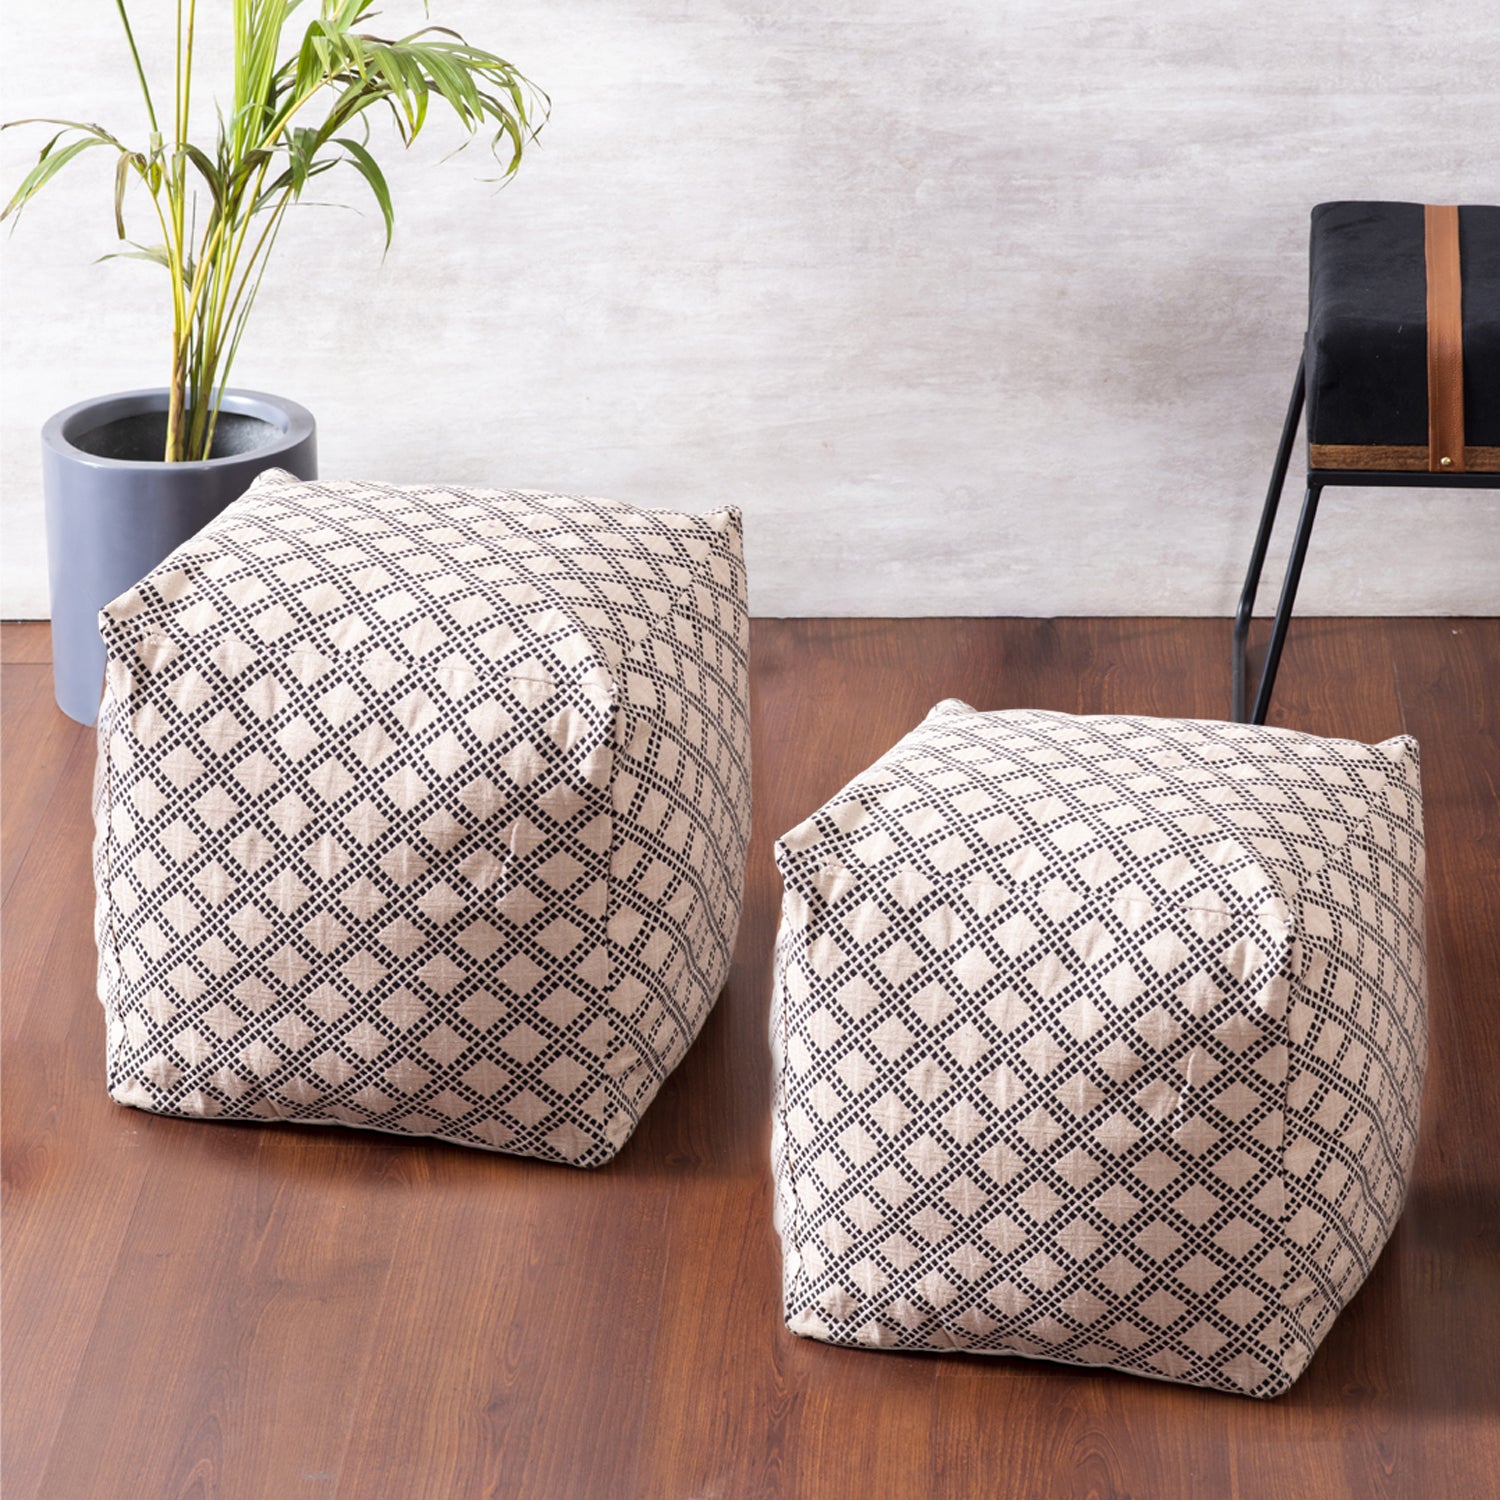 Buy White Criss Cross Pouf Set of 2 with Filler Online in India